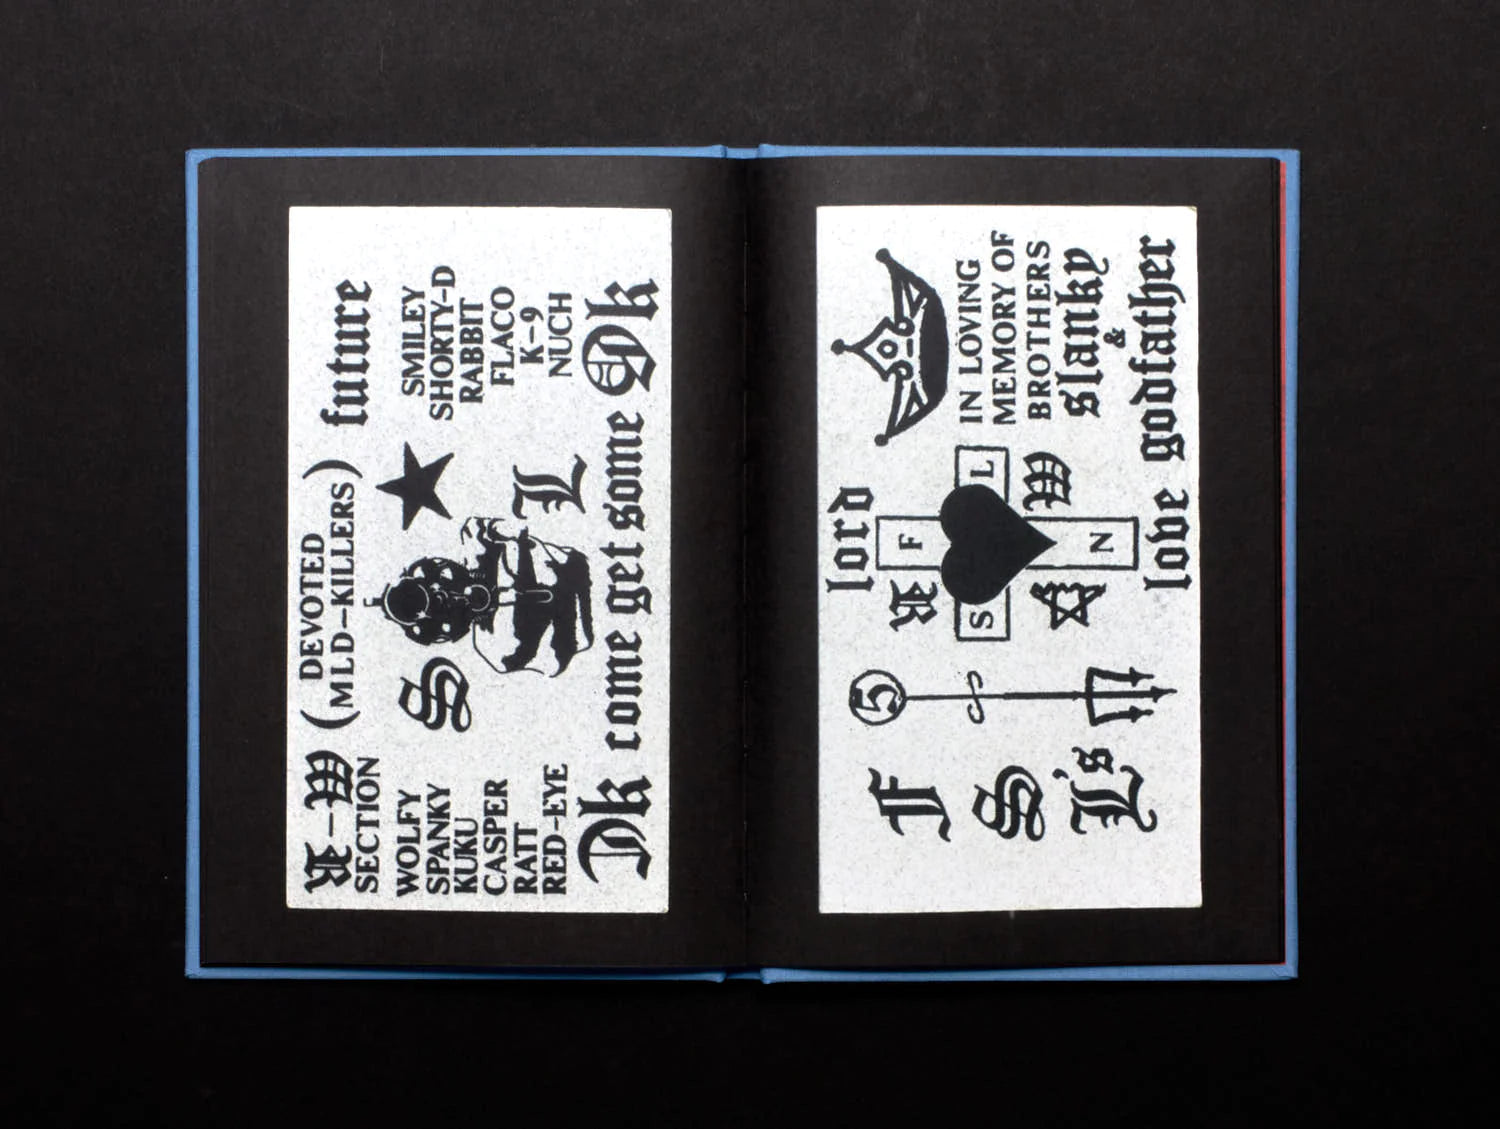 THEE ALMIGHTY &amp; INSANE: CHICAGO GANG BUSINESS CARDS FROM THE 1970s &amp; 1980s: CHICAGO GANG BUSINESS CARDS FROM THE 1970s &amp; 1980s